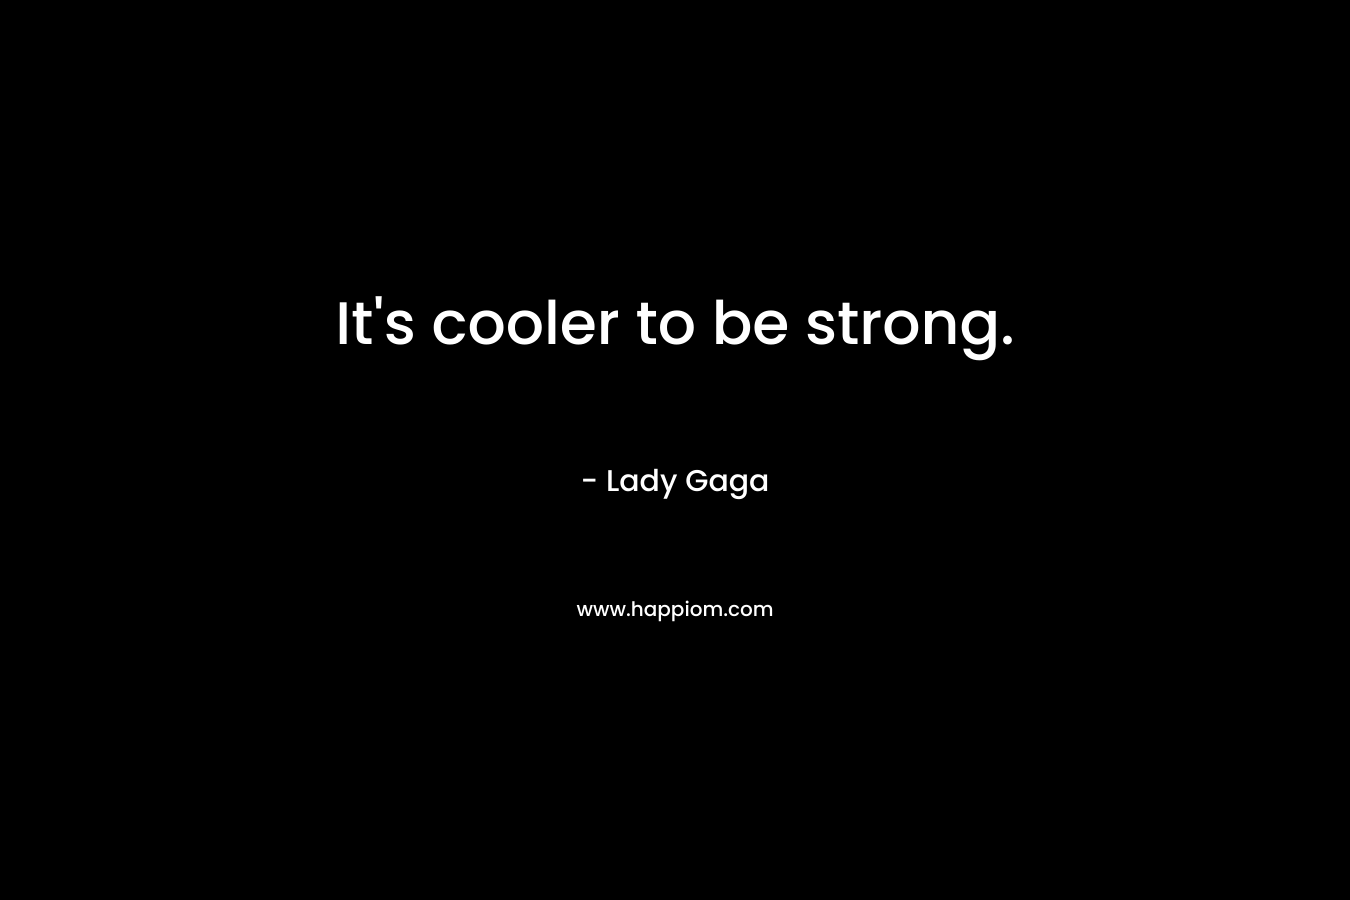 It's cooler to be strong.